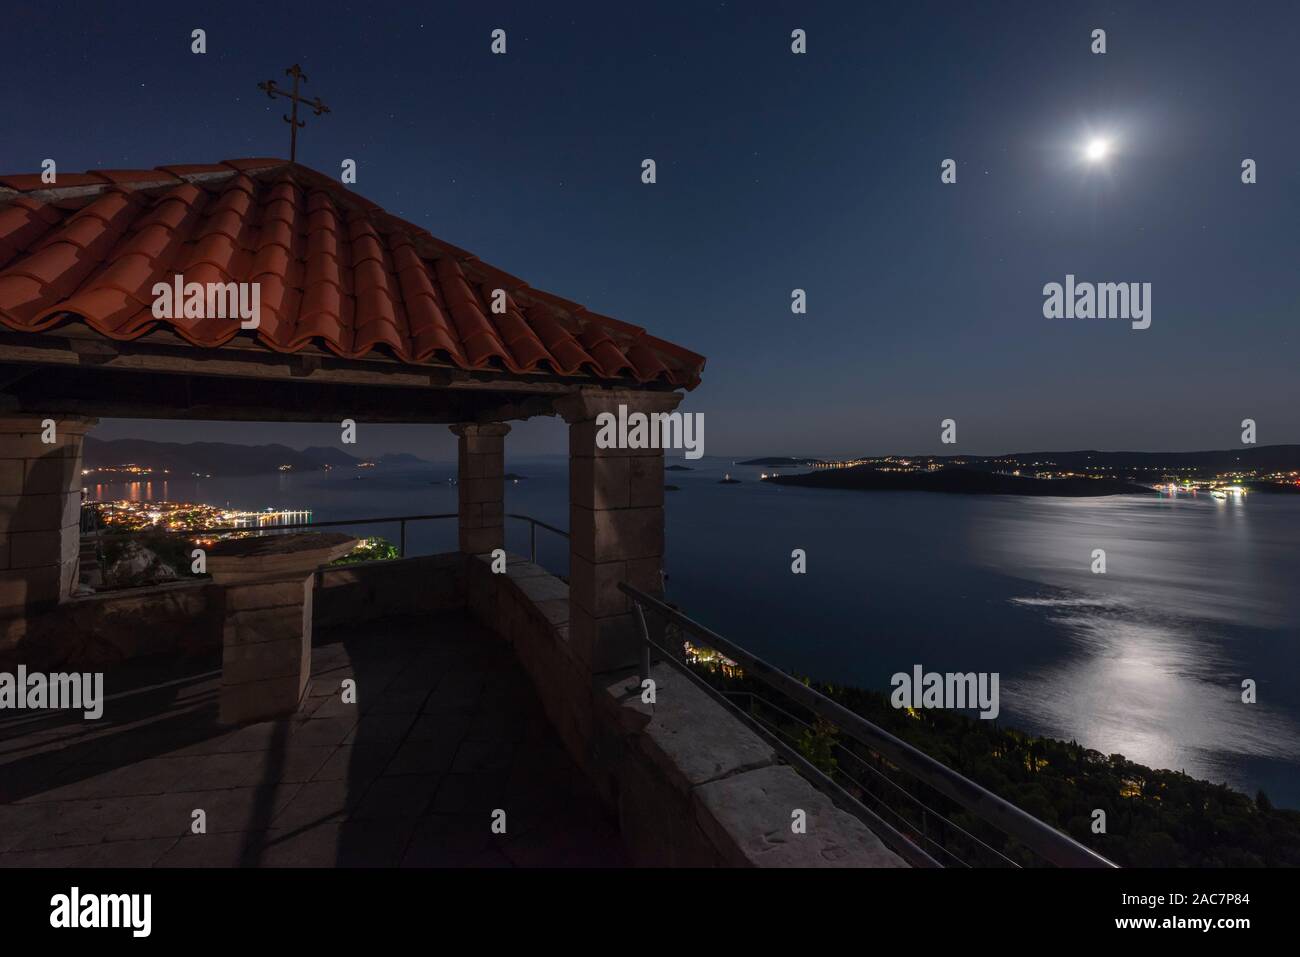 View from the loggia at the Franciscan monastery near Orebic over the Peljesac canal to the island of Korcula in the moonlight, Dalmatia, Croatia Stock Photo